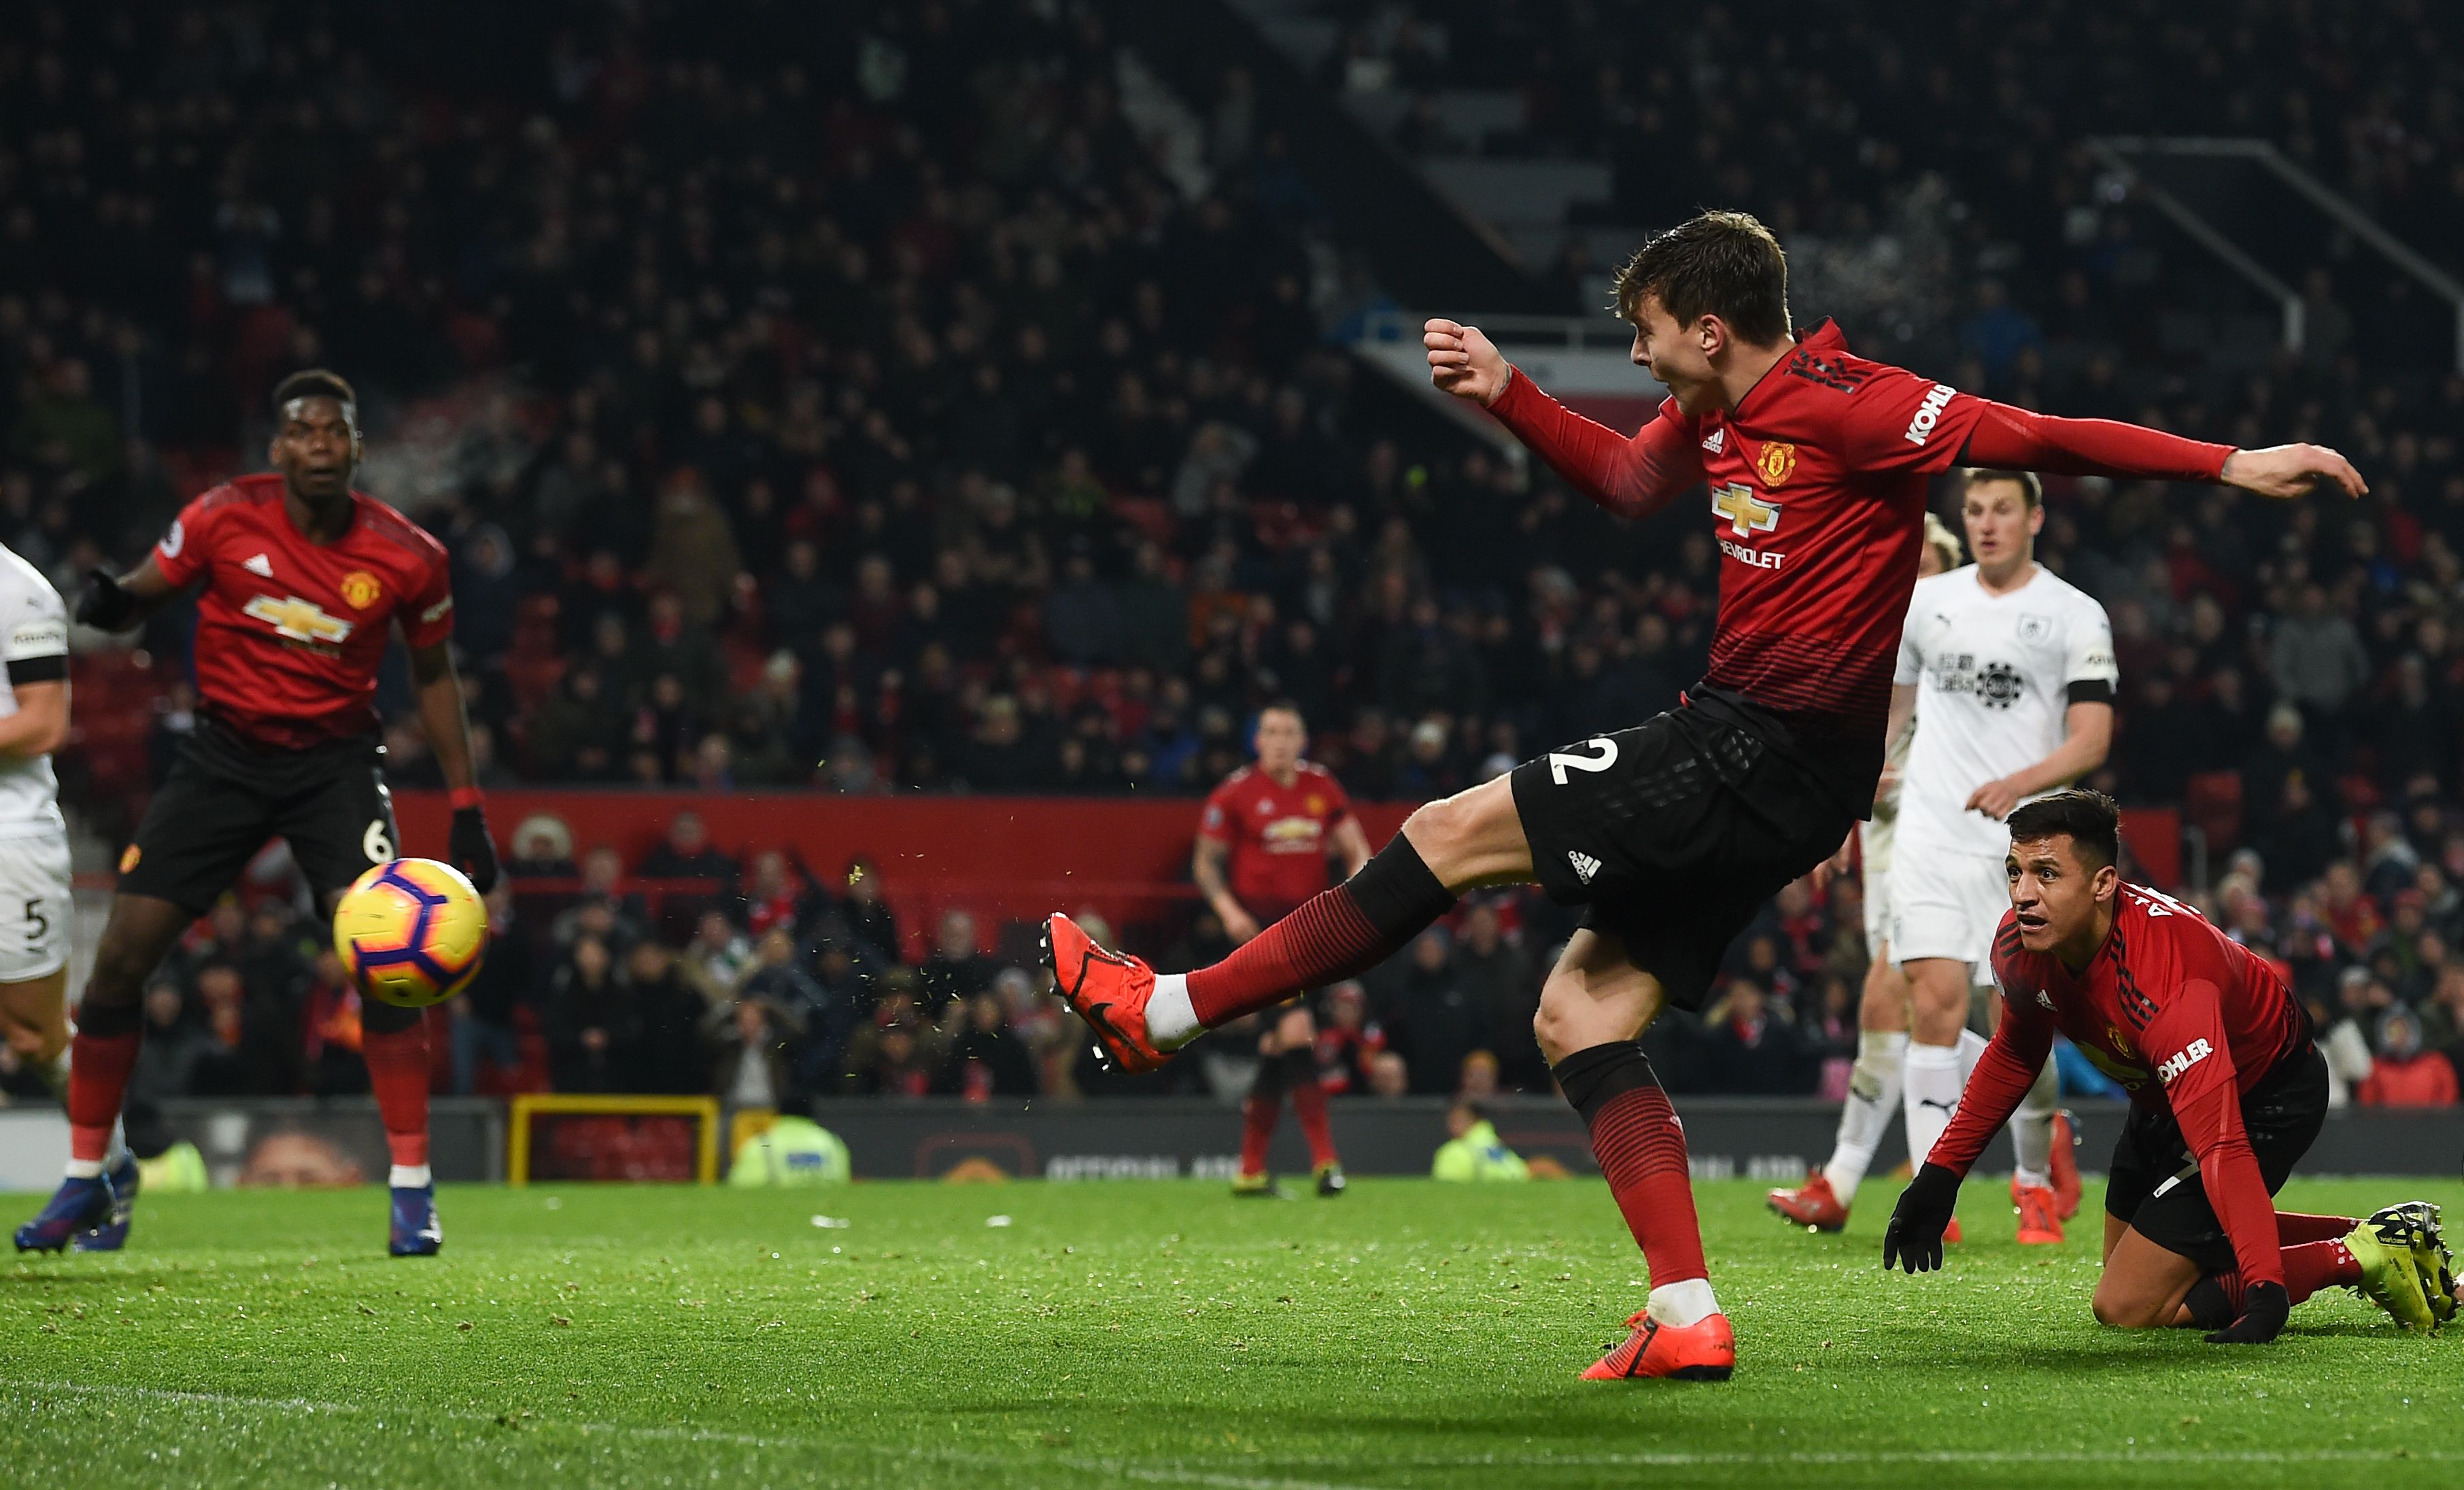 Manchester United's Swedish defender Victor Lindelof (R) shoots to score their second goal to equalise 2-2 during the English Premier League football match between Manchester United and Burnley at Old Trafford in Manchester, north west England, on January 29, 2019. (Photo by Paul ELLIS / AFP) / RESTRICTED TO EDITORIAL USE. No use with unauthorized audio, video, data, fixture lists, club/league logos or 'live' services. Online in-match use limited to 120 images. An additional 40 images may be used in extra time. No video emulation. Social media in-match use limited to 120 images. An additional 40 images may be used in extra time. No use in betting publications, games or single club/league/player publications. /         (Photo credit should read PAUL ELLIS/AFP/Getty Images)